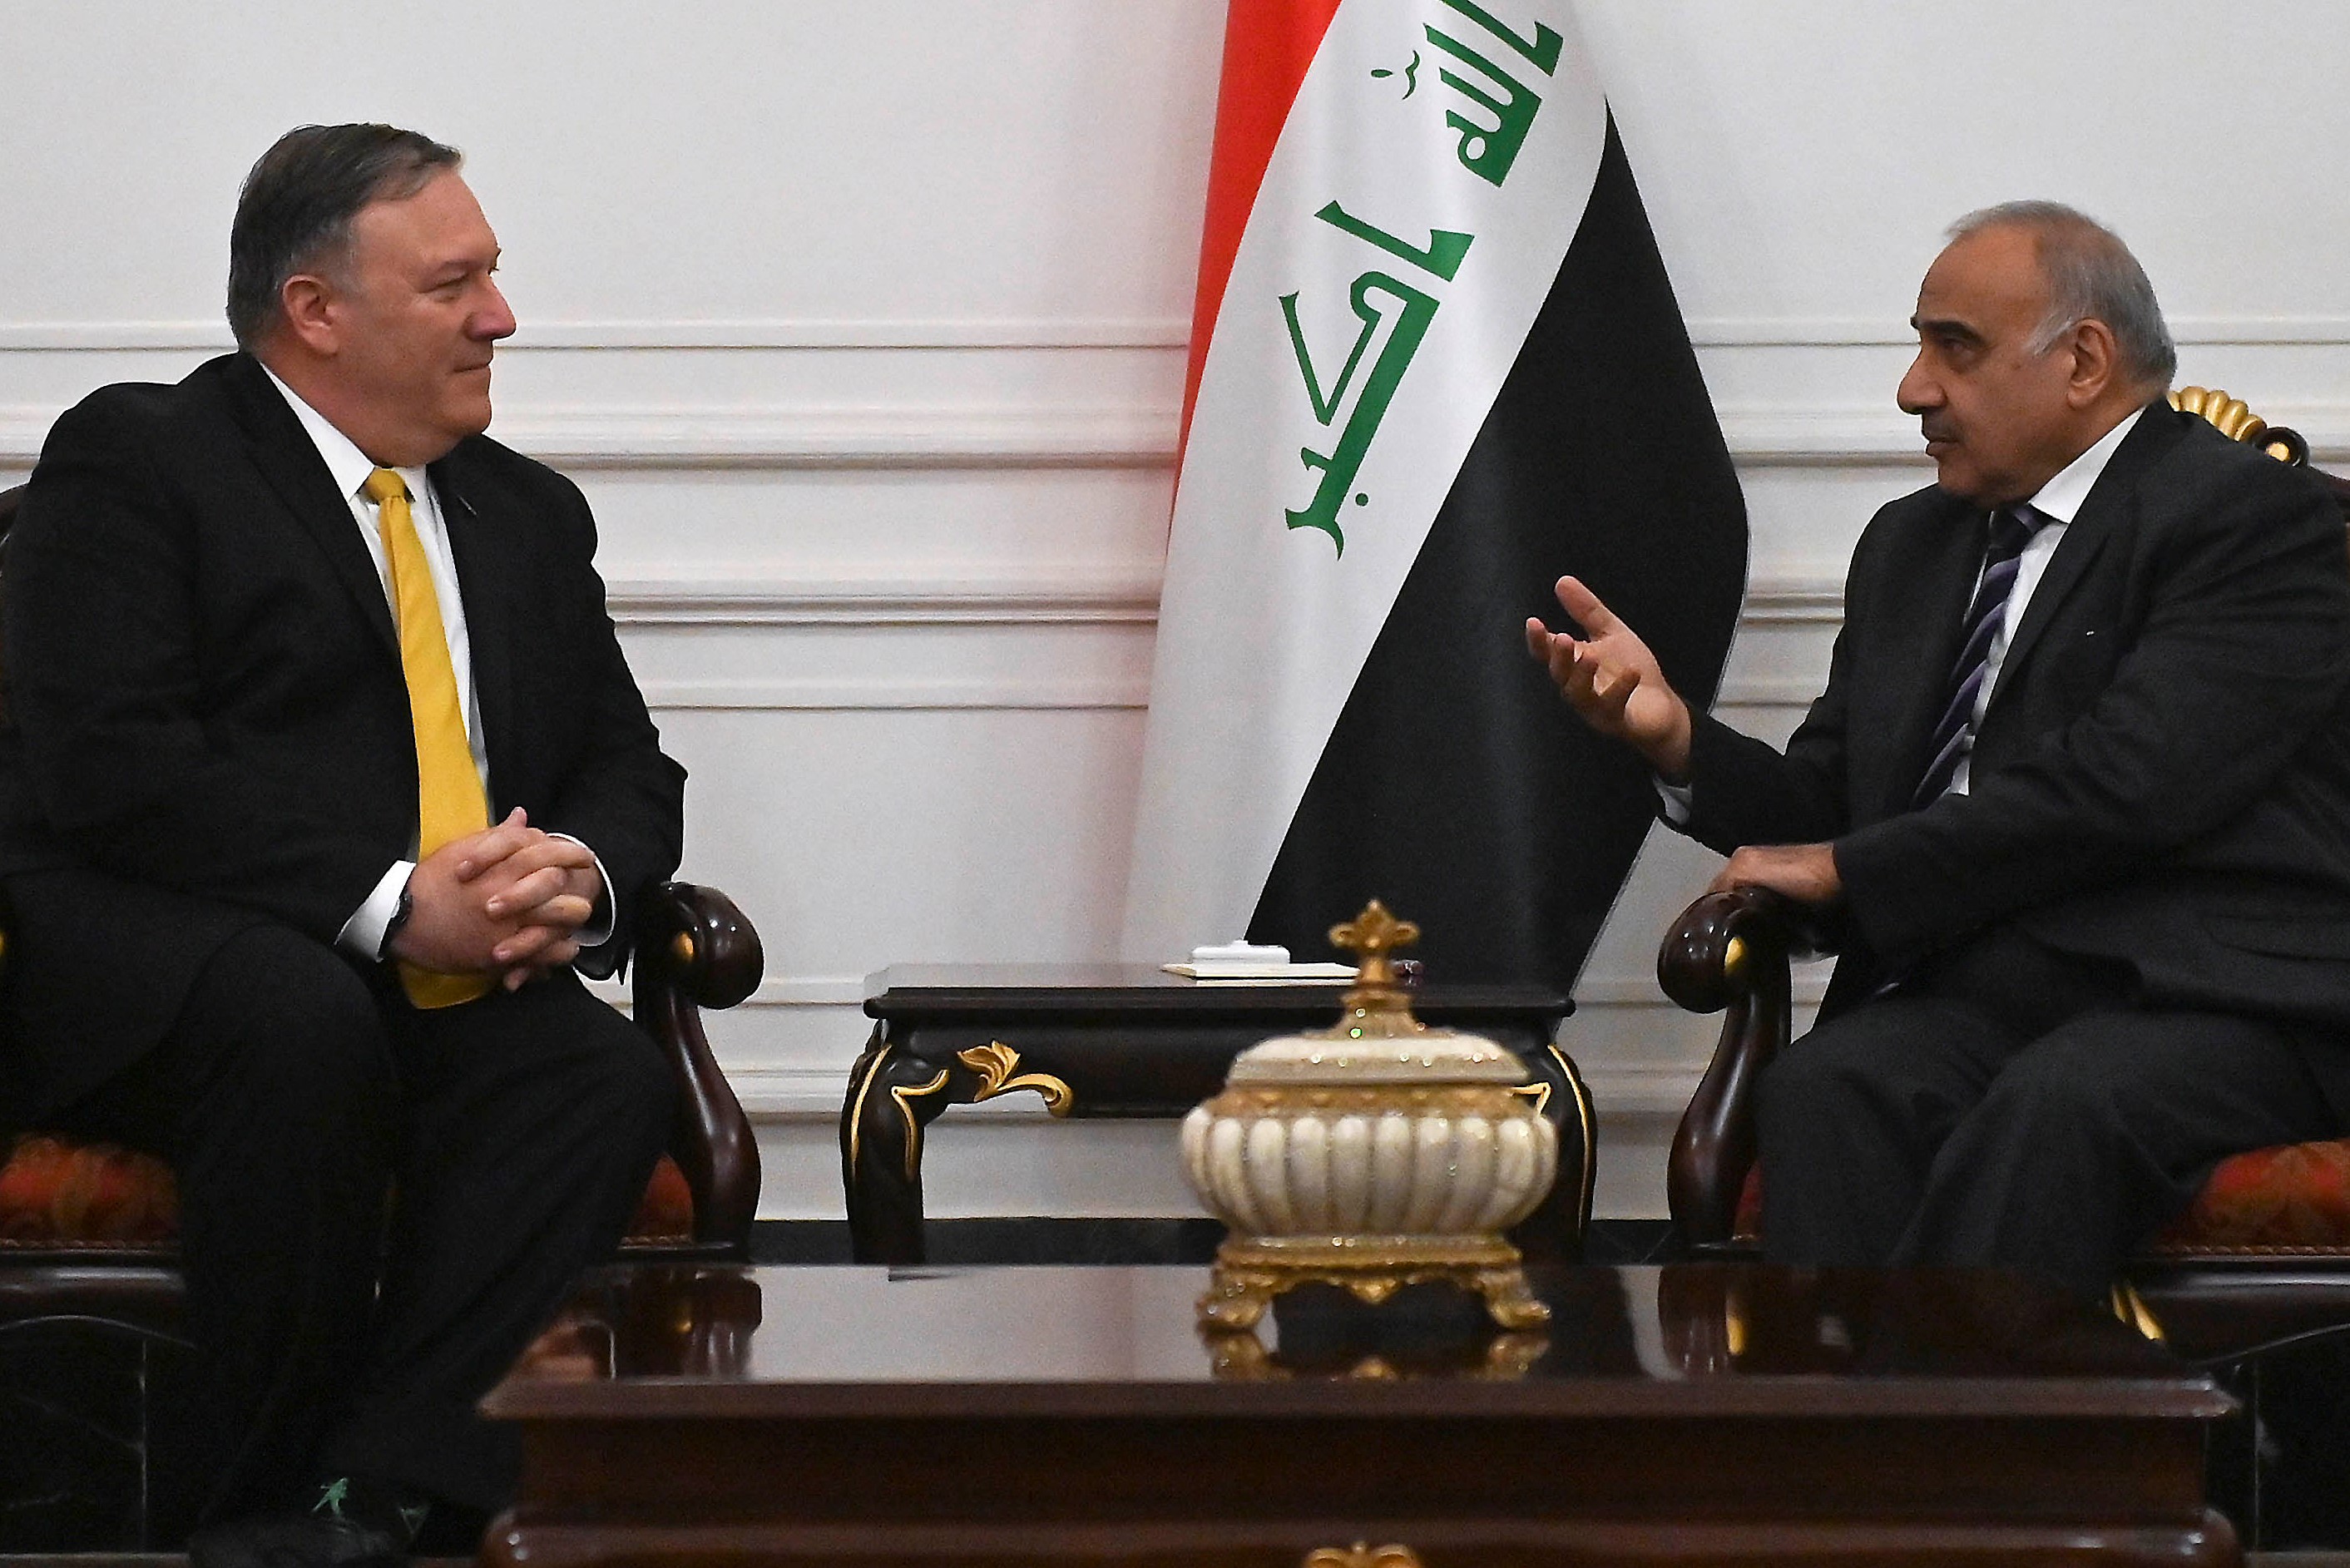 US Secretary of State Mike Pompeo meets with Iraqi Prime Minister Adel Abdul-Mahdi in Baghdad, Iraq on 9 January (Reuters)